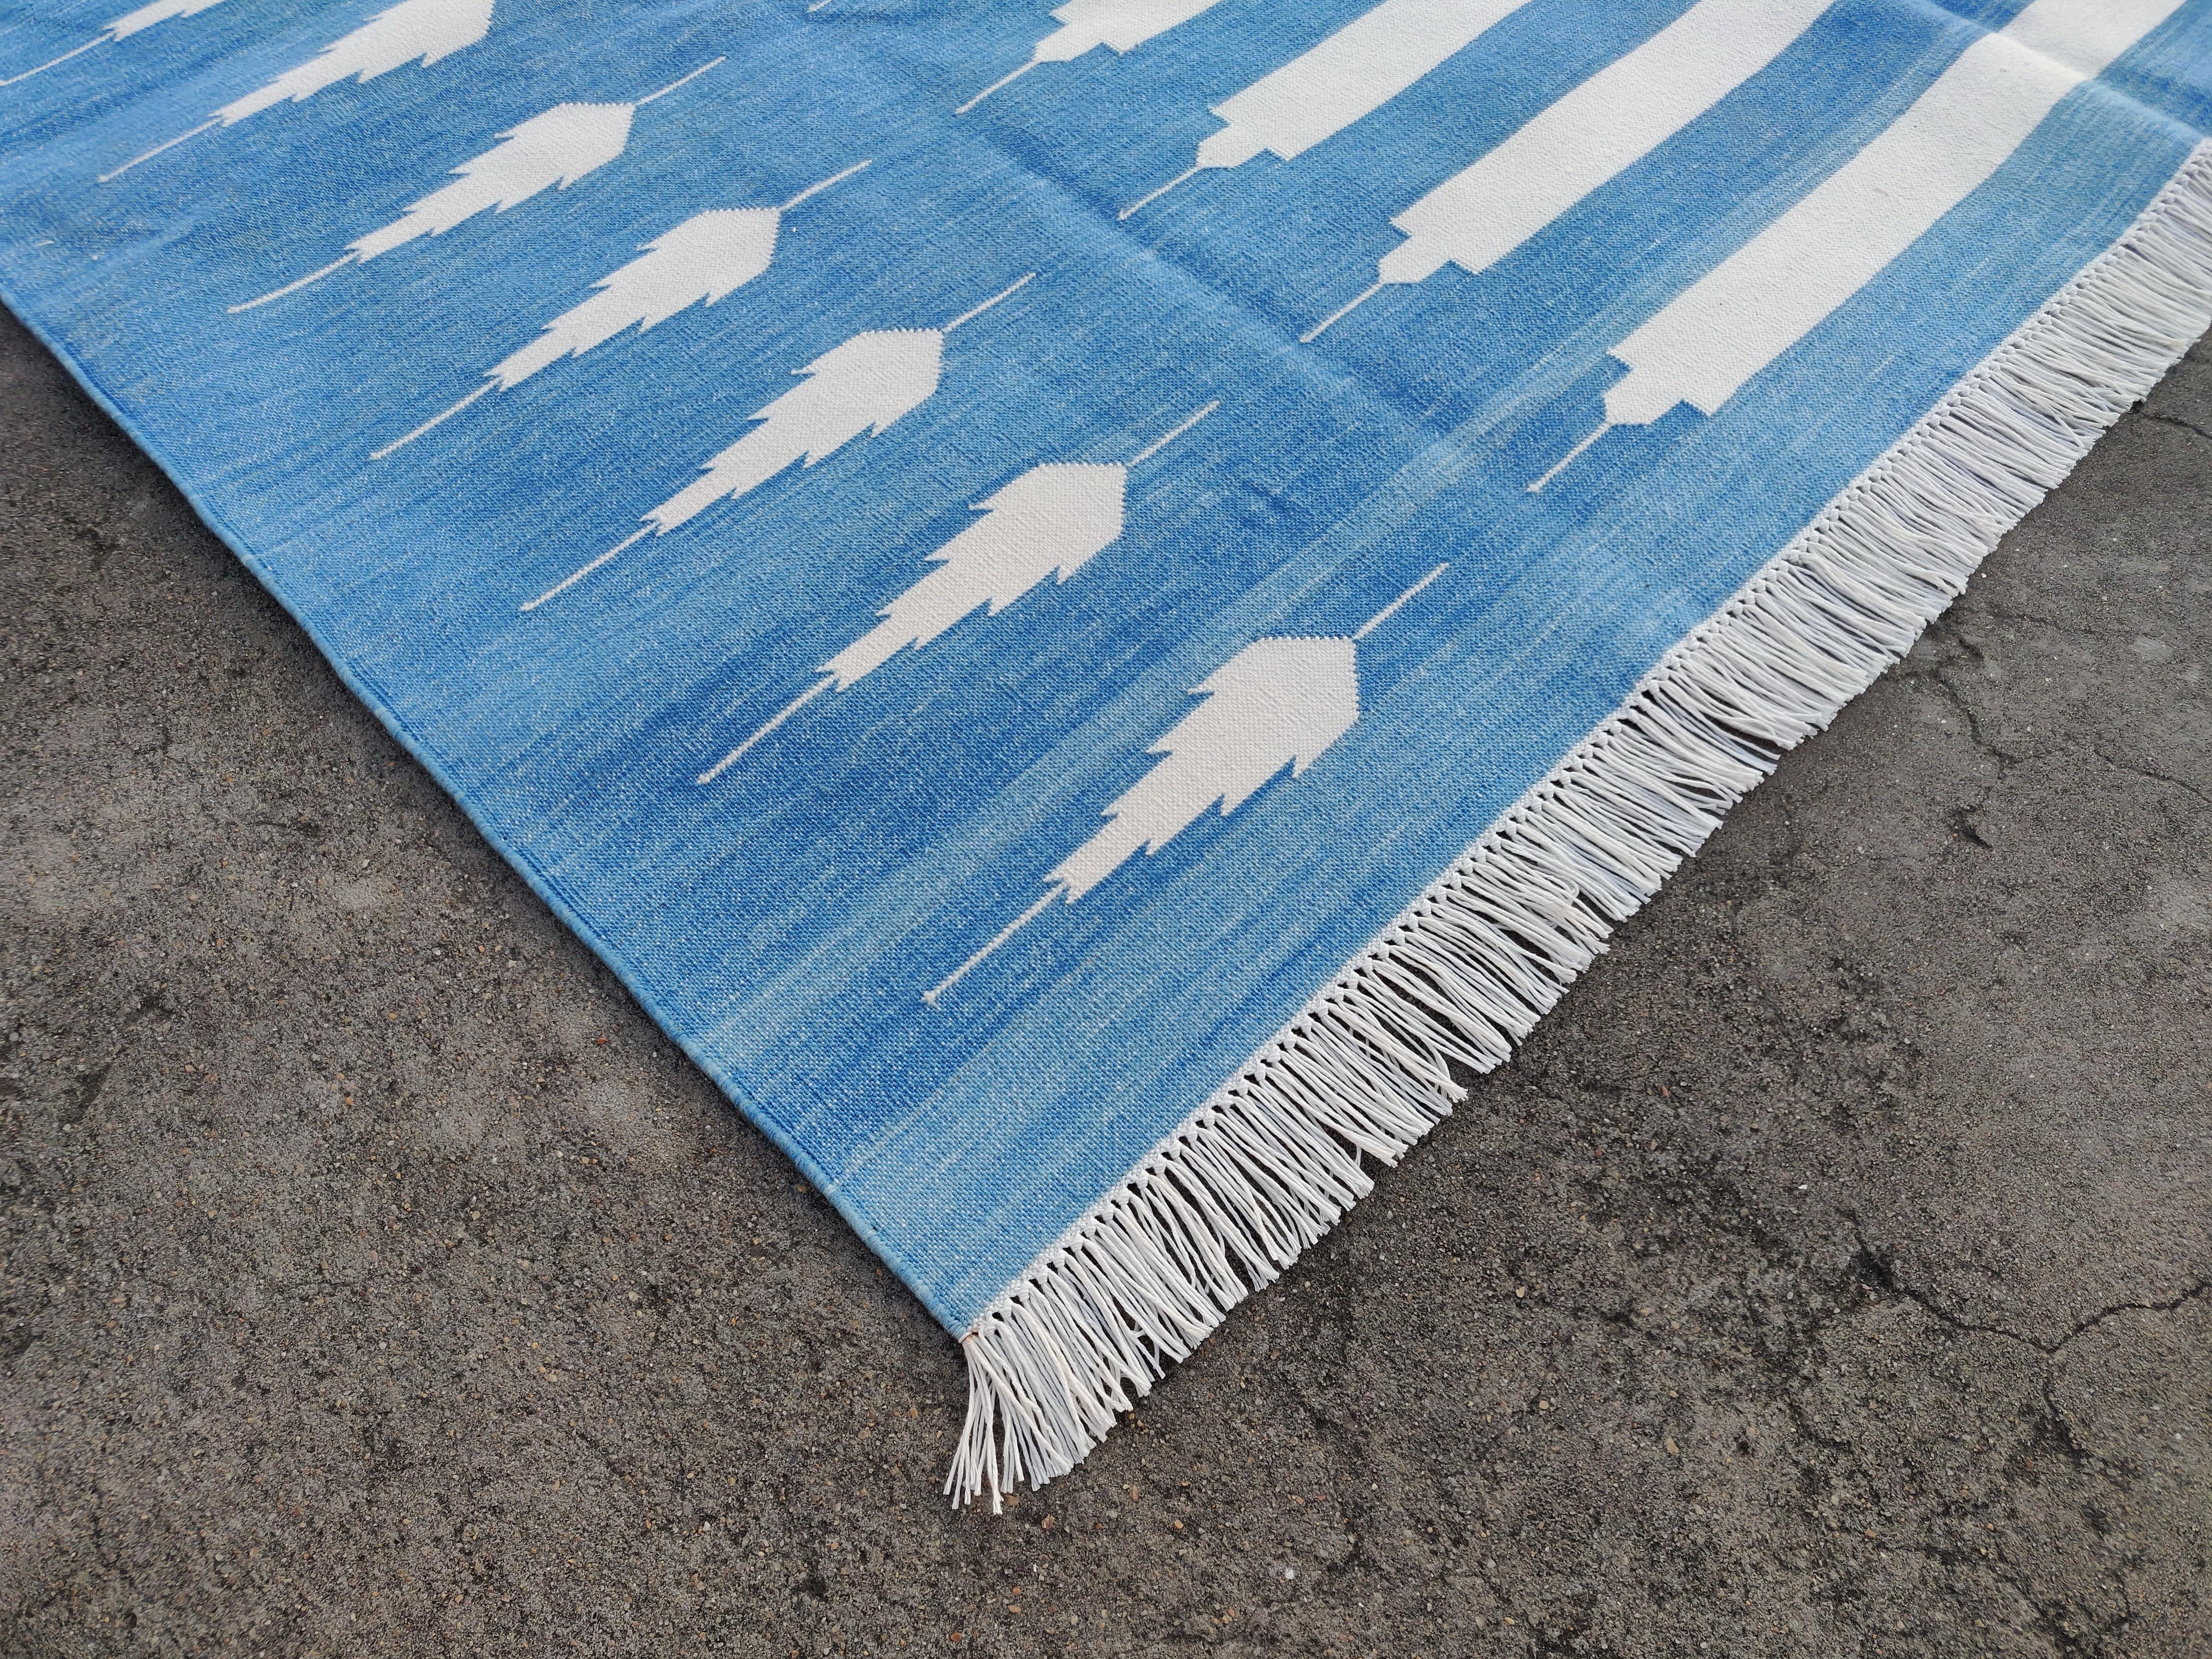 Hand-Woven Handmade Cotton Area Flat Weave Rug, 5x8 Blue And White Striped Indian Dhurrie For Sale